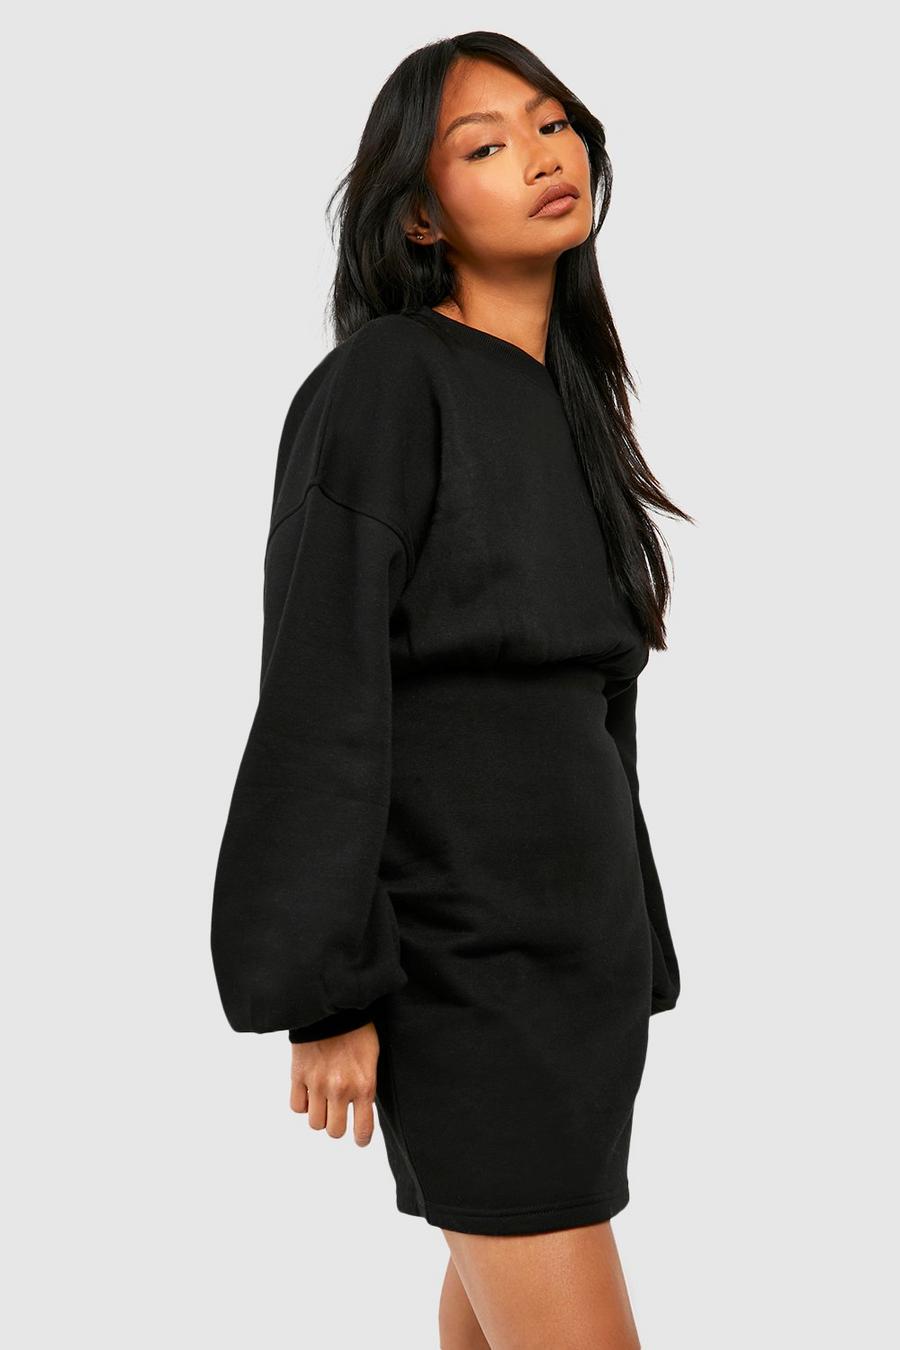 Black Crew Neck Fitted Sweat Dress